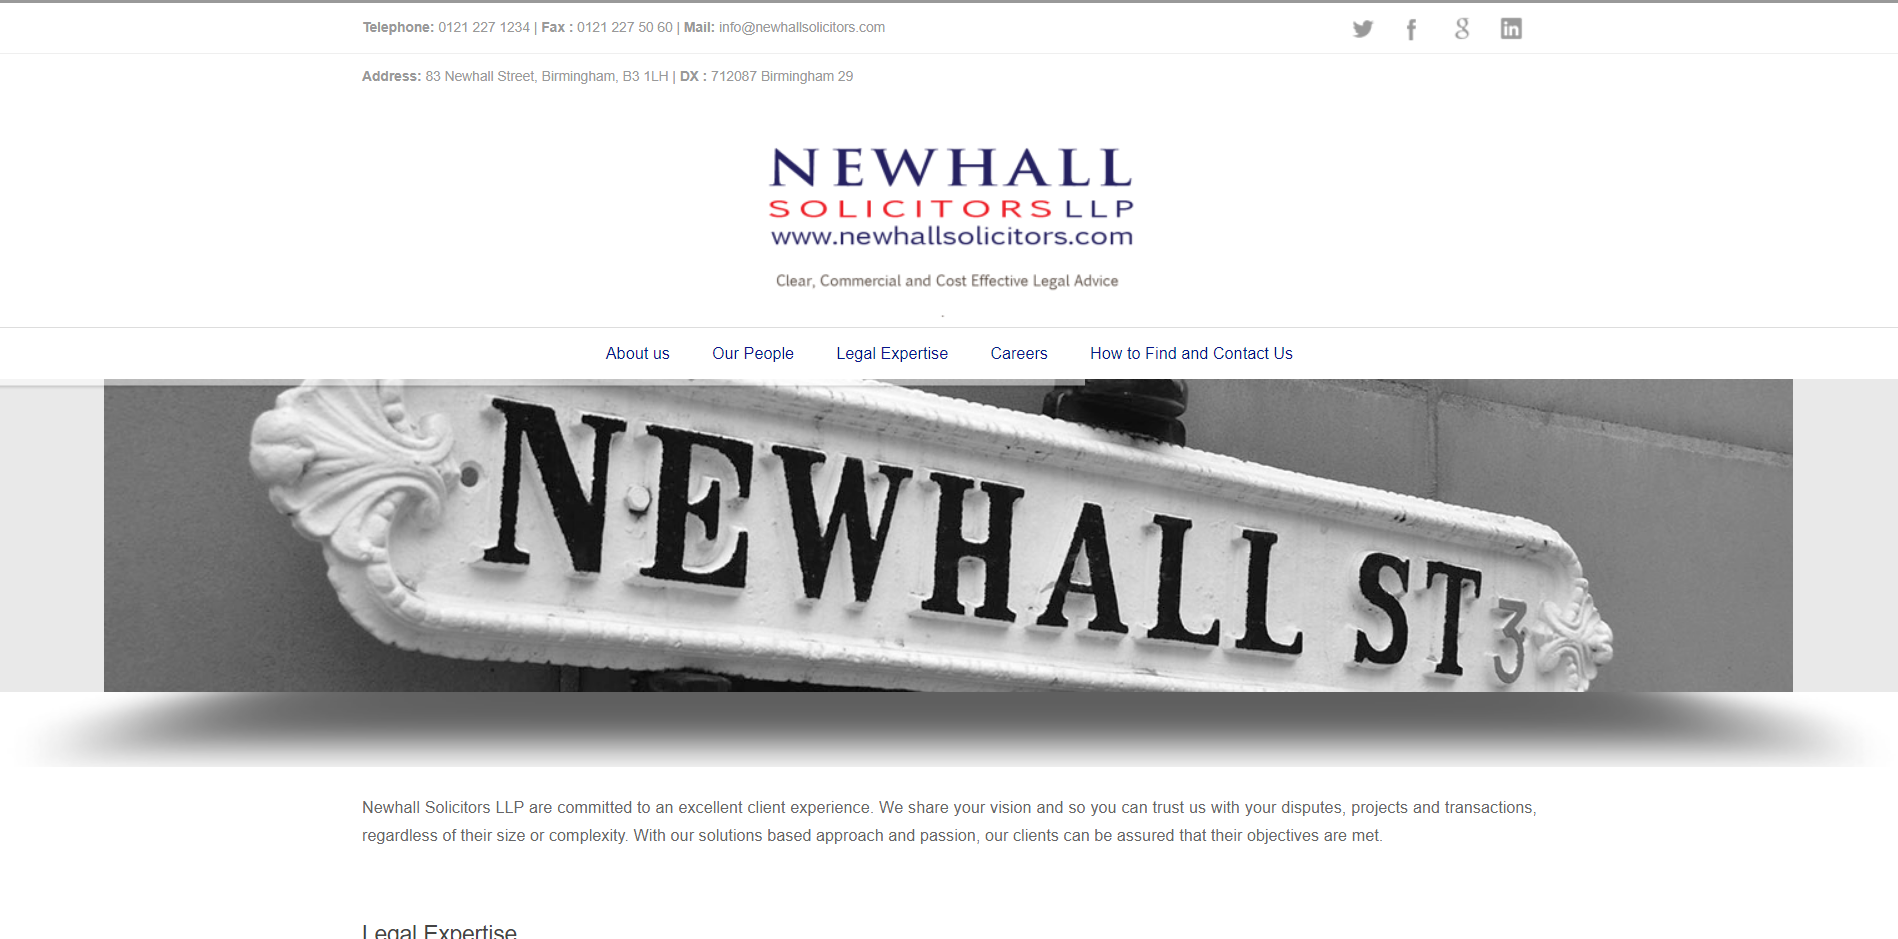 Newhall Solicitors